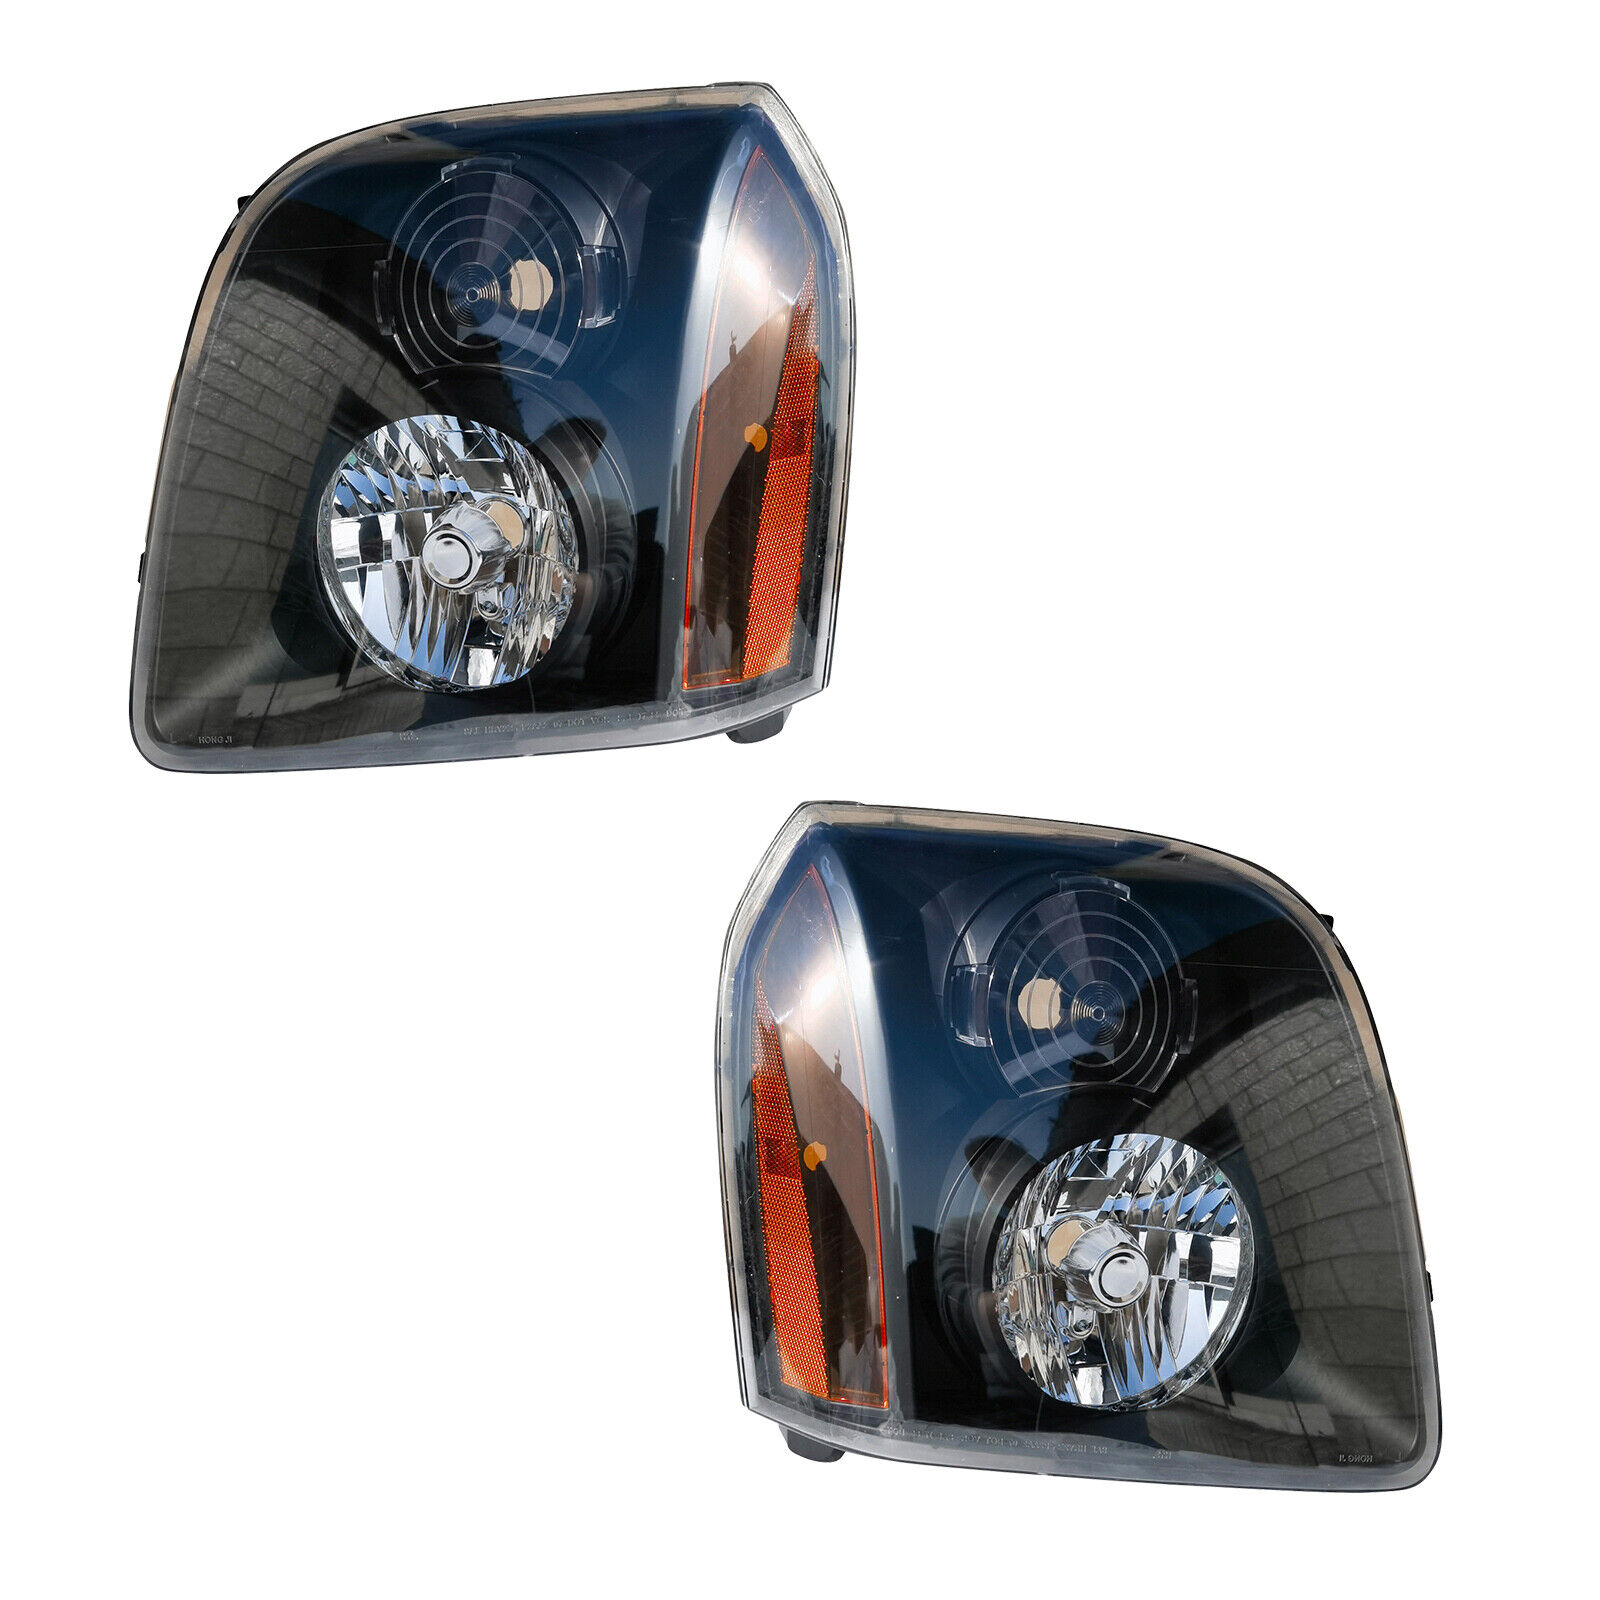 Headlight Assembly Fits [Product Name] 1 Pair